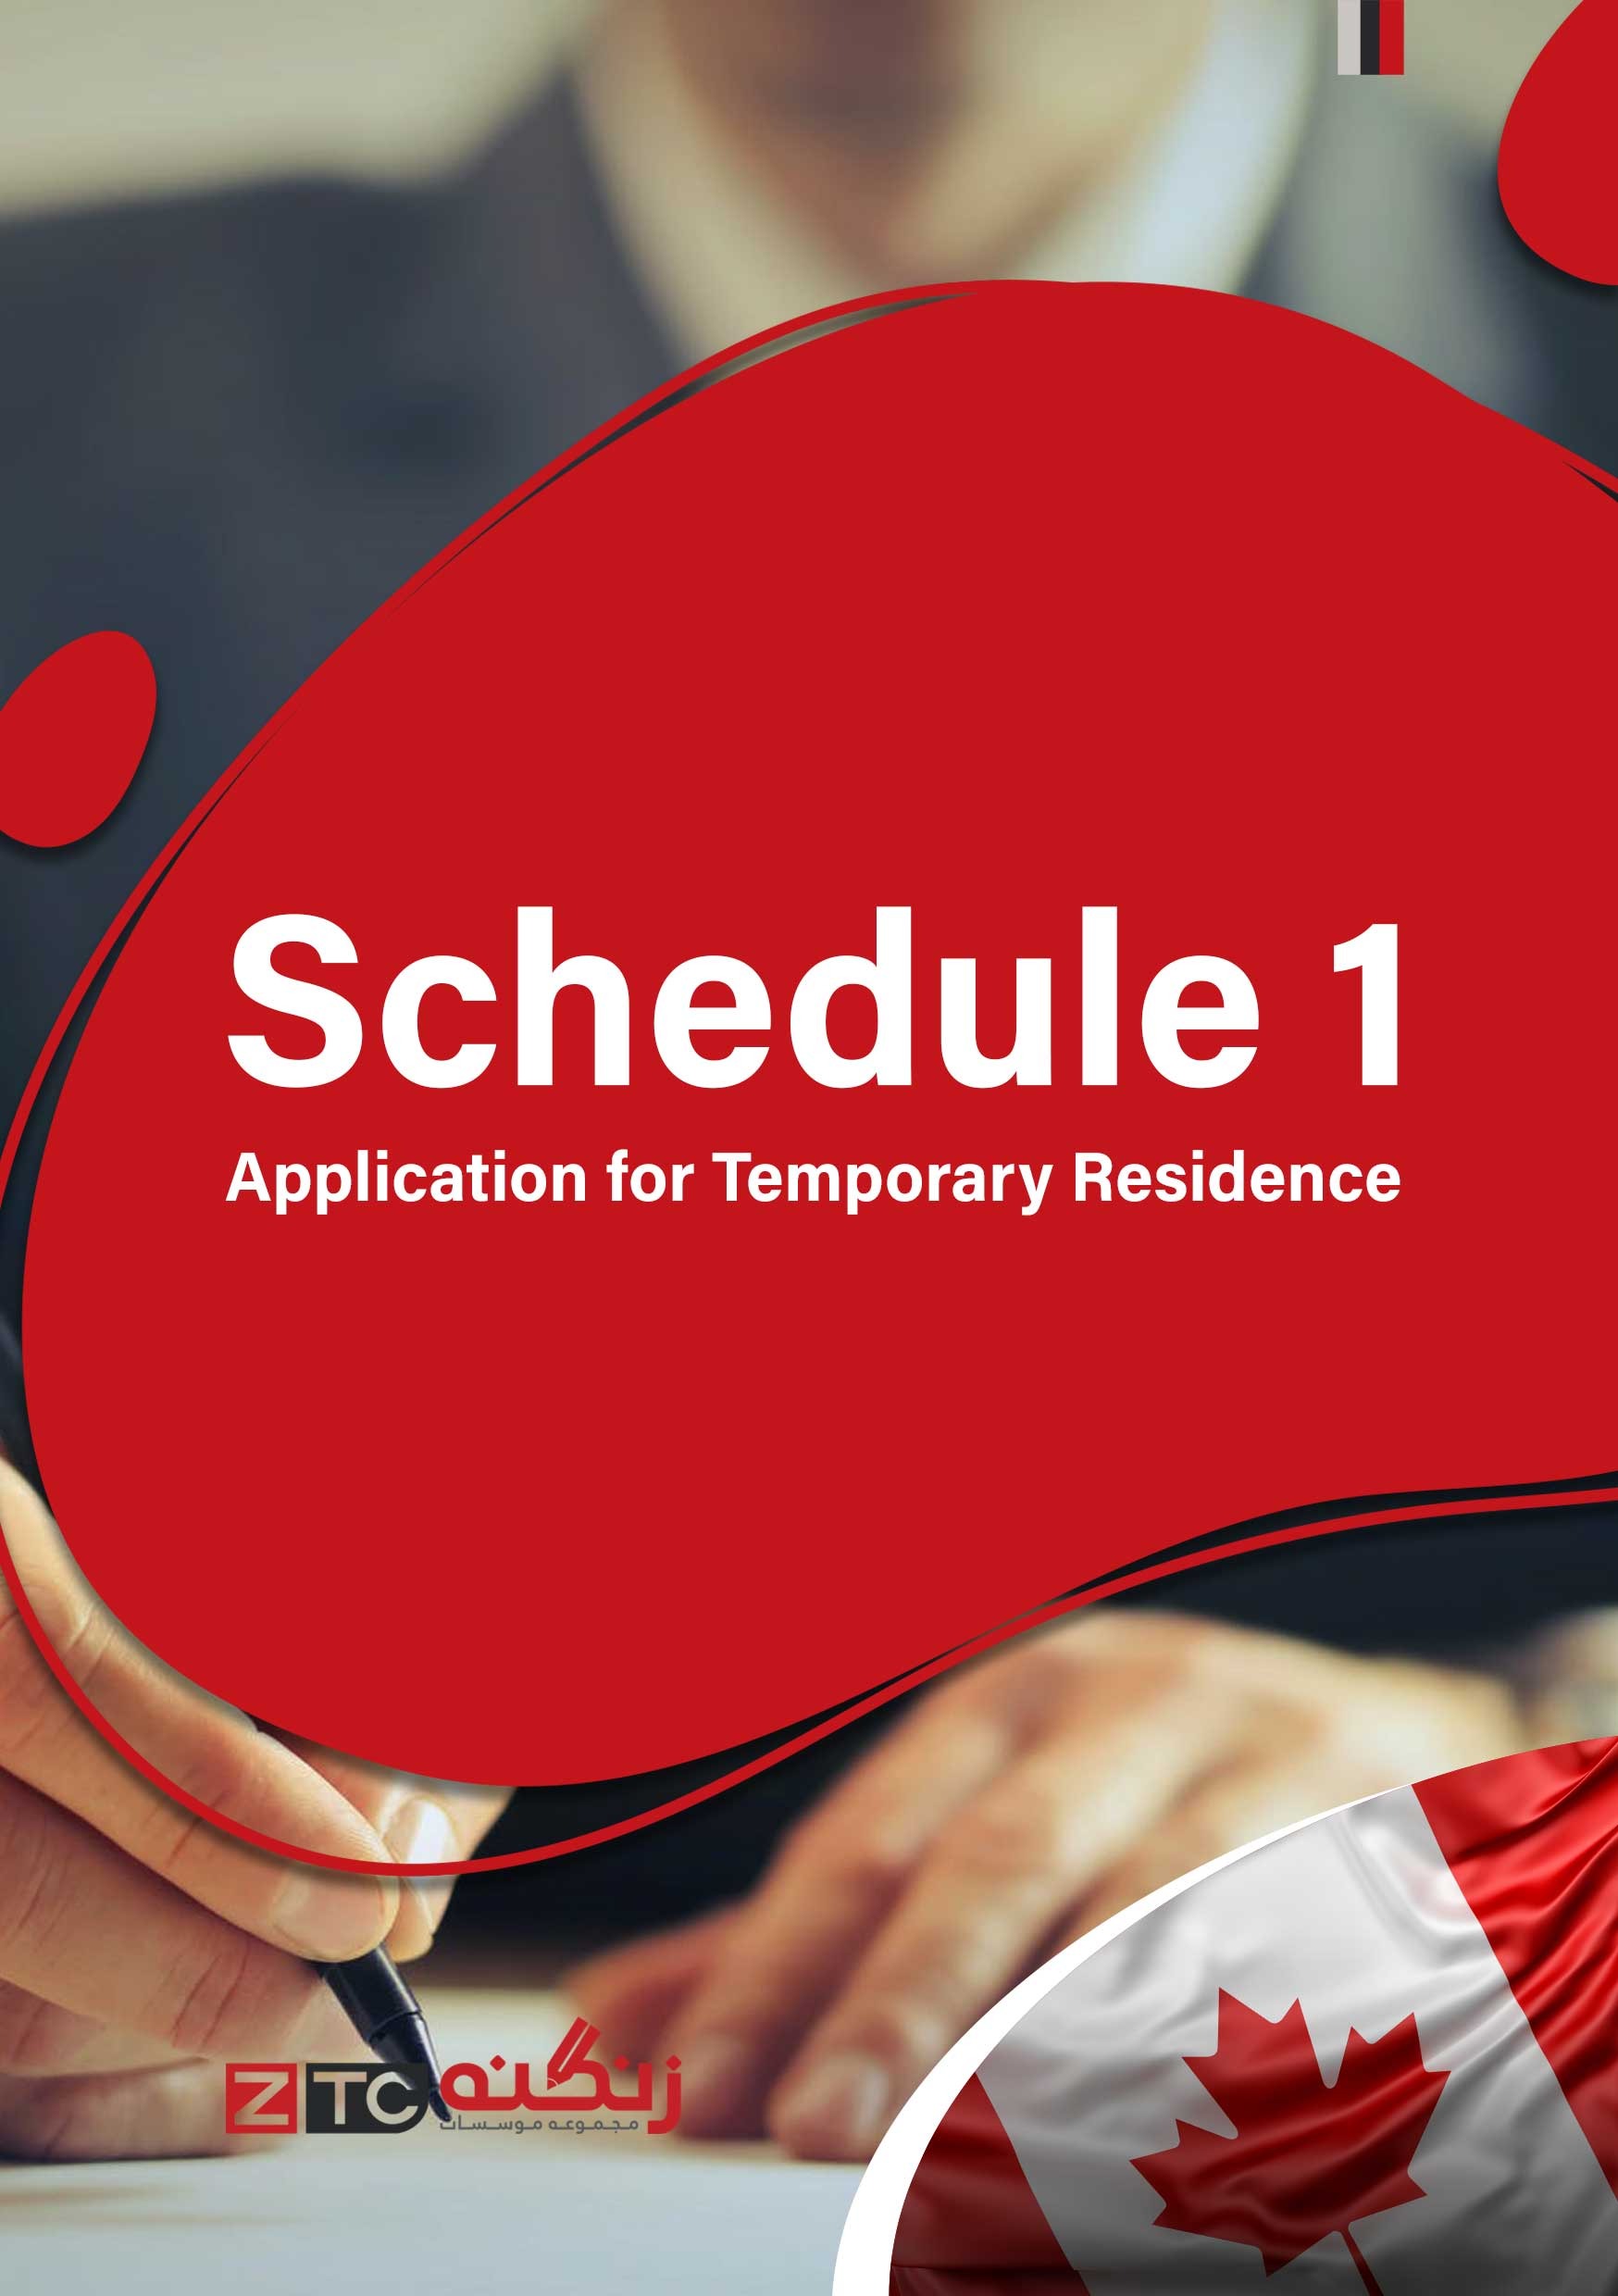 Schedule 1 - Application for Temporary Residence